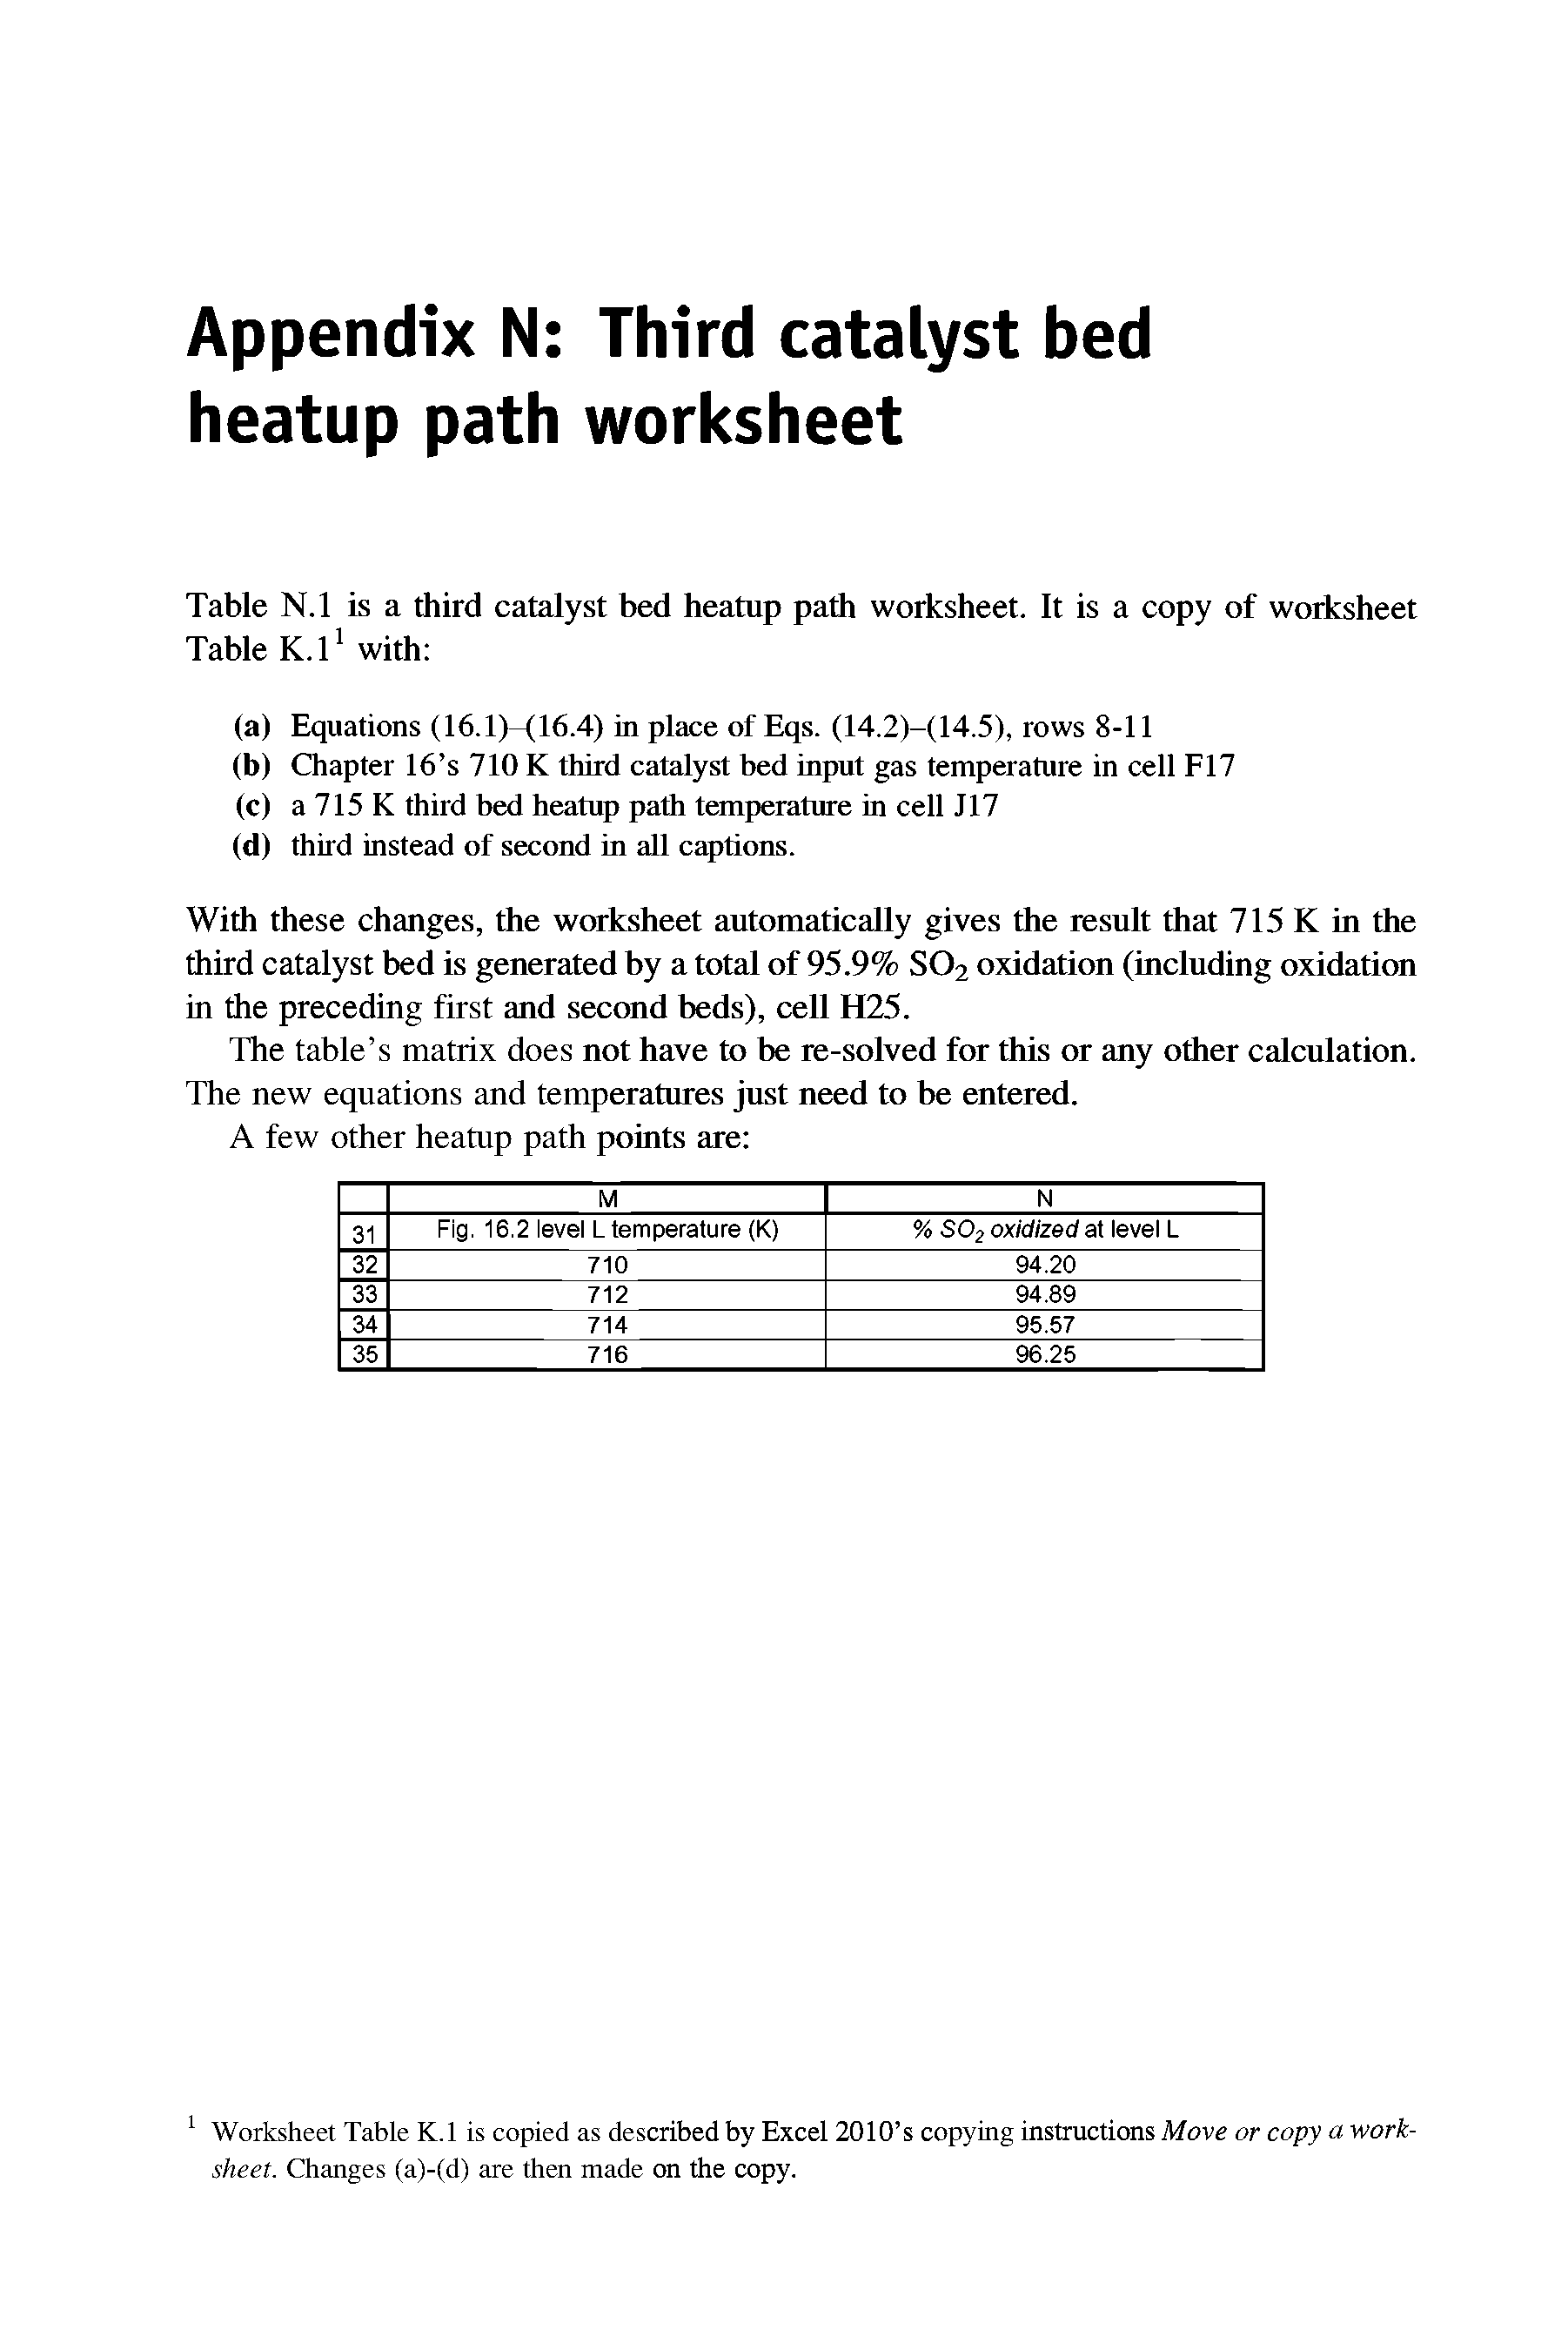 Table N.l is a third catalyst bed heatup path worksheet. It is a copy of worksheet Table K.l with ...